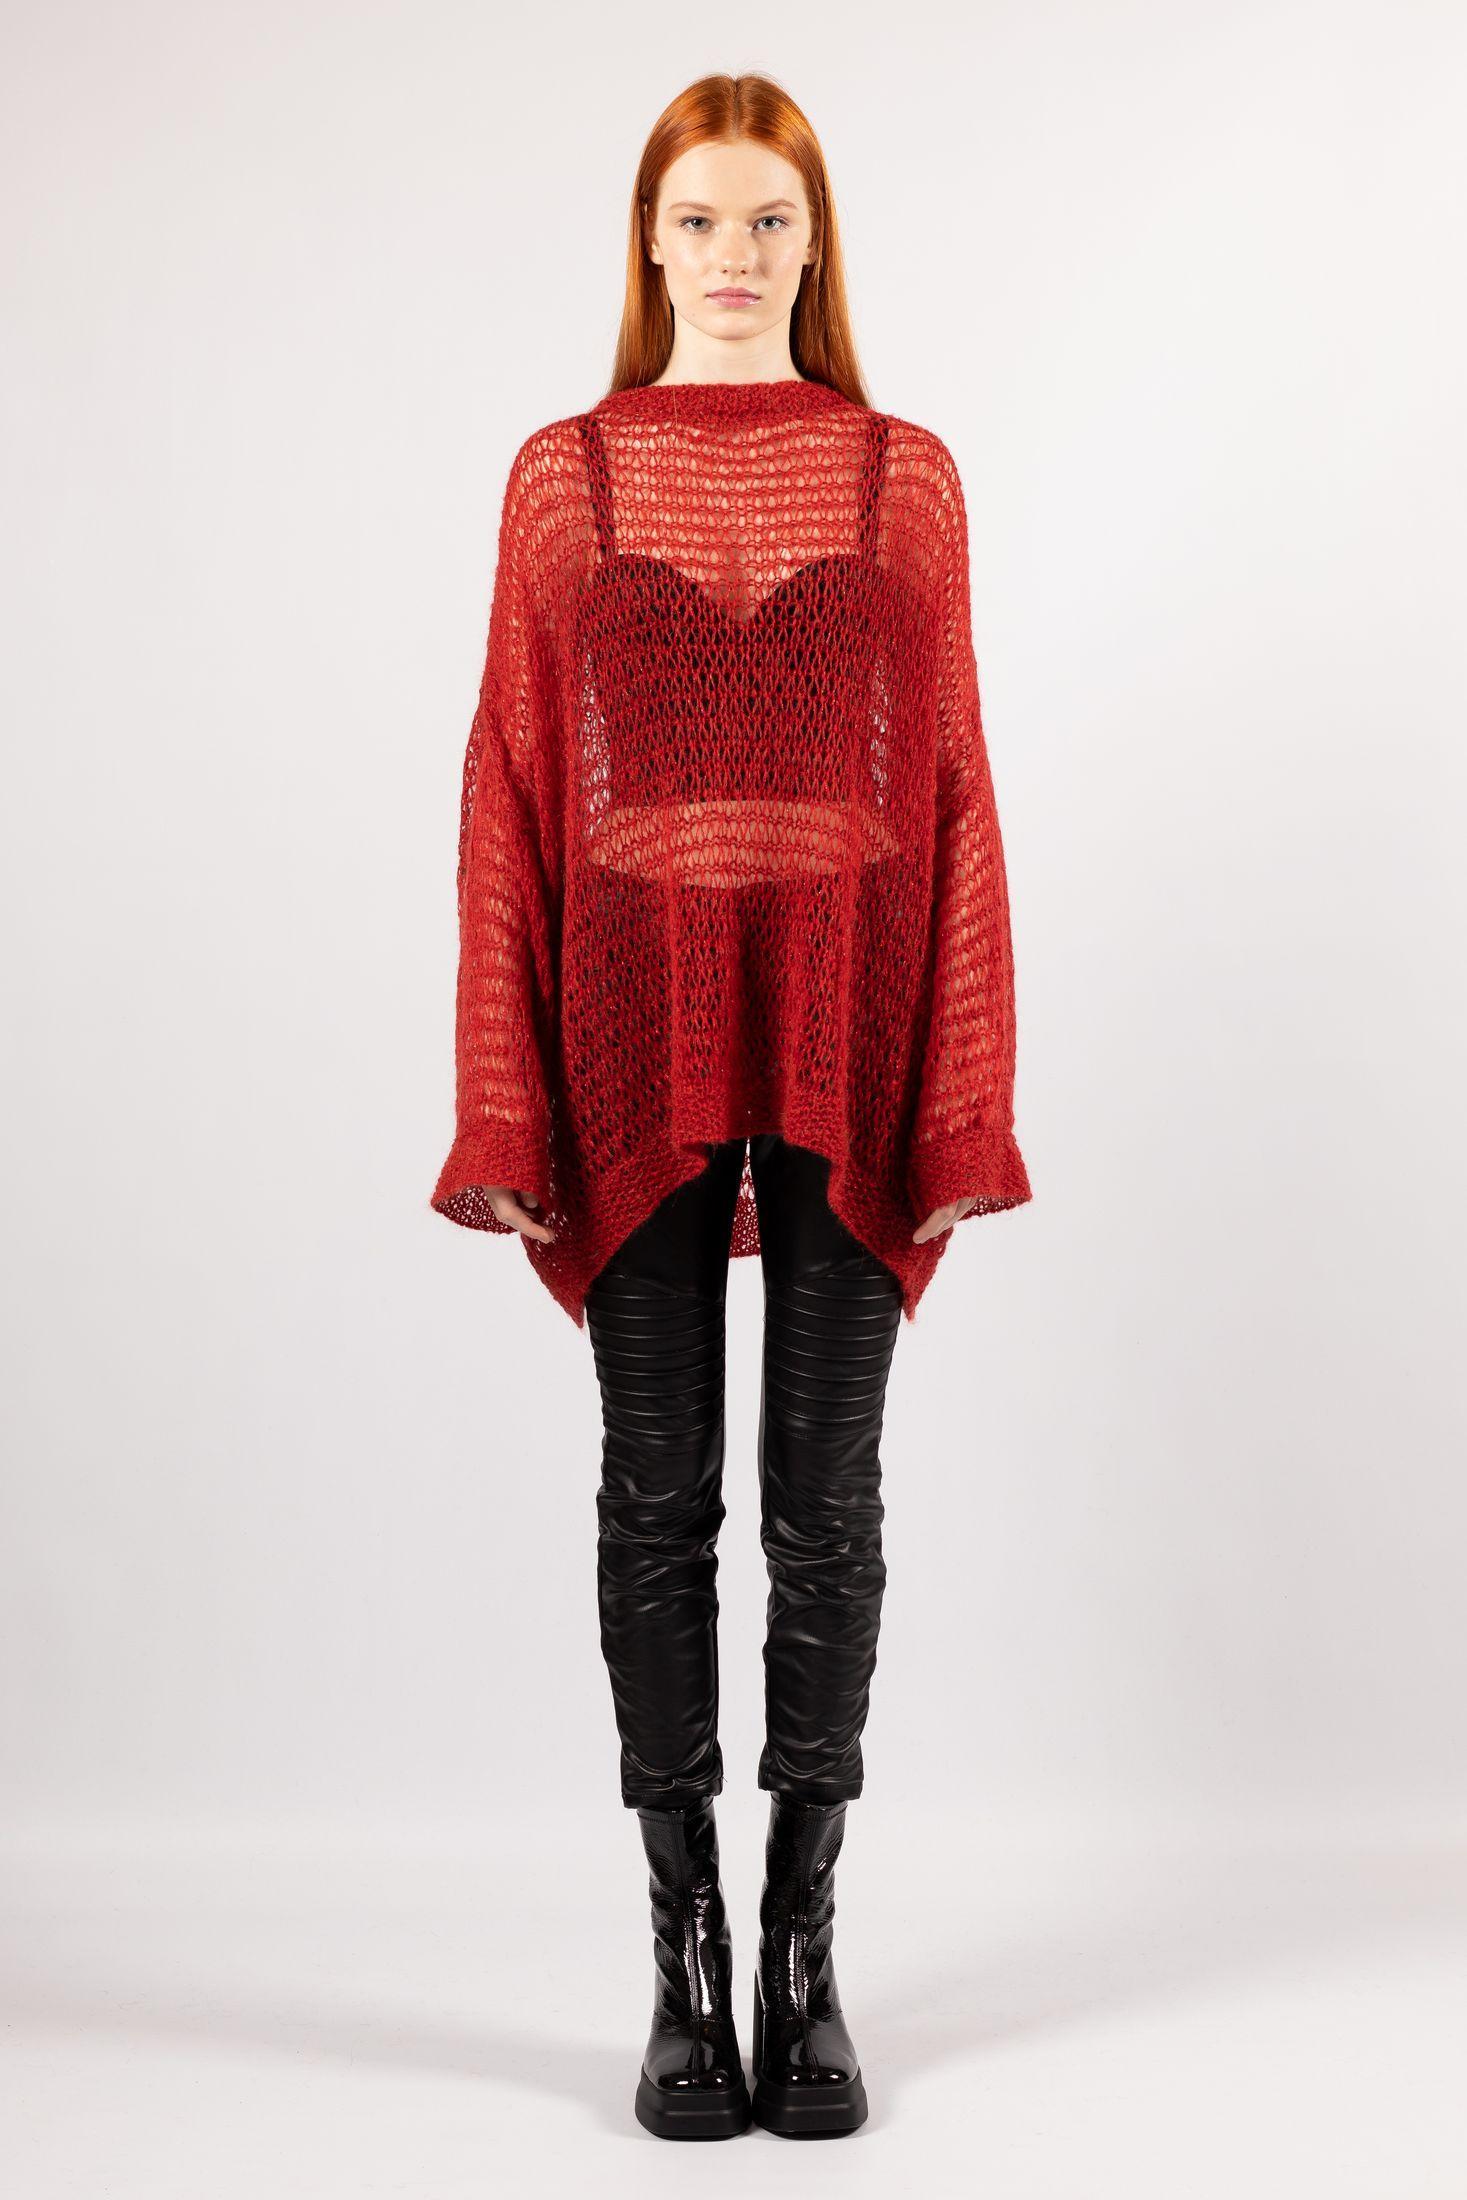 Elegant IDA red mohair tunic sweater with a beautifully crafted open-loop pattern in hand-knit design